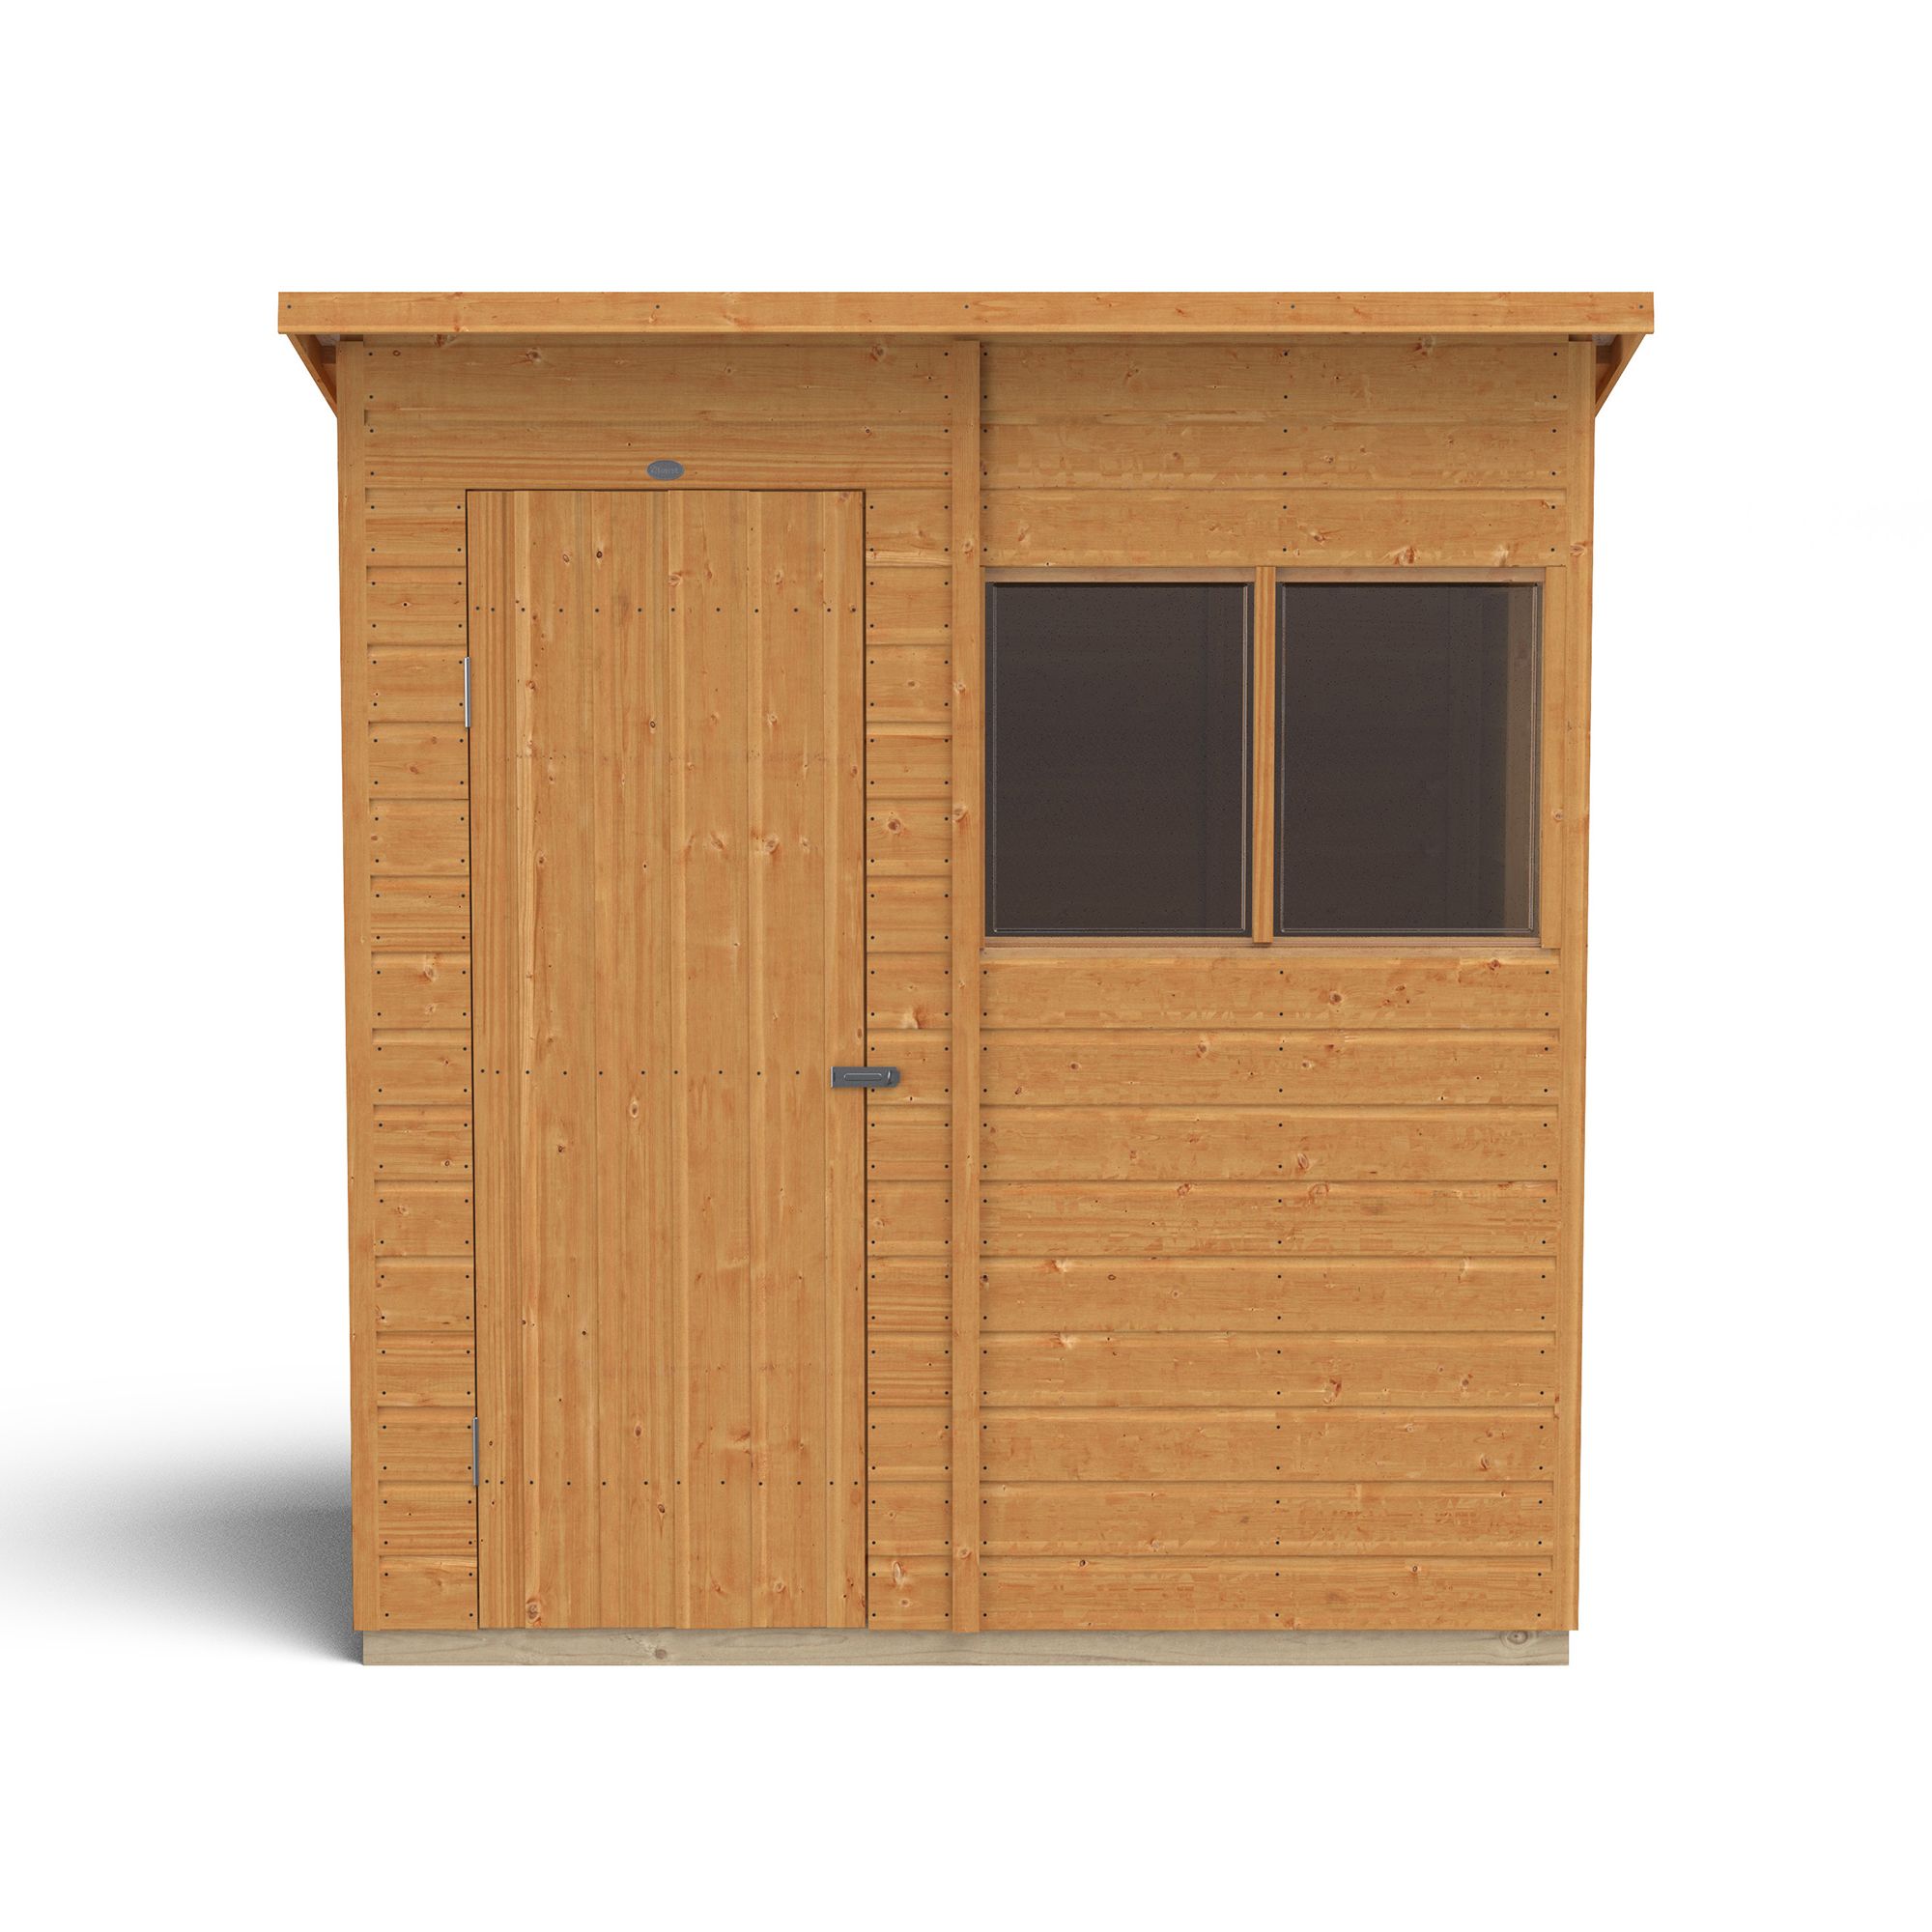 Forest Garden Shiplap 6x4 ft Pent Wooden Shed with floor & 2 windows (Base included)